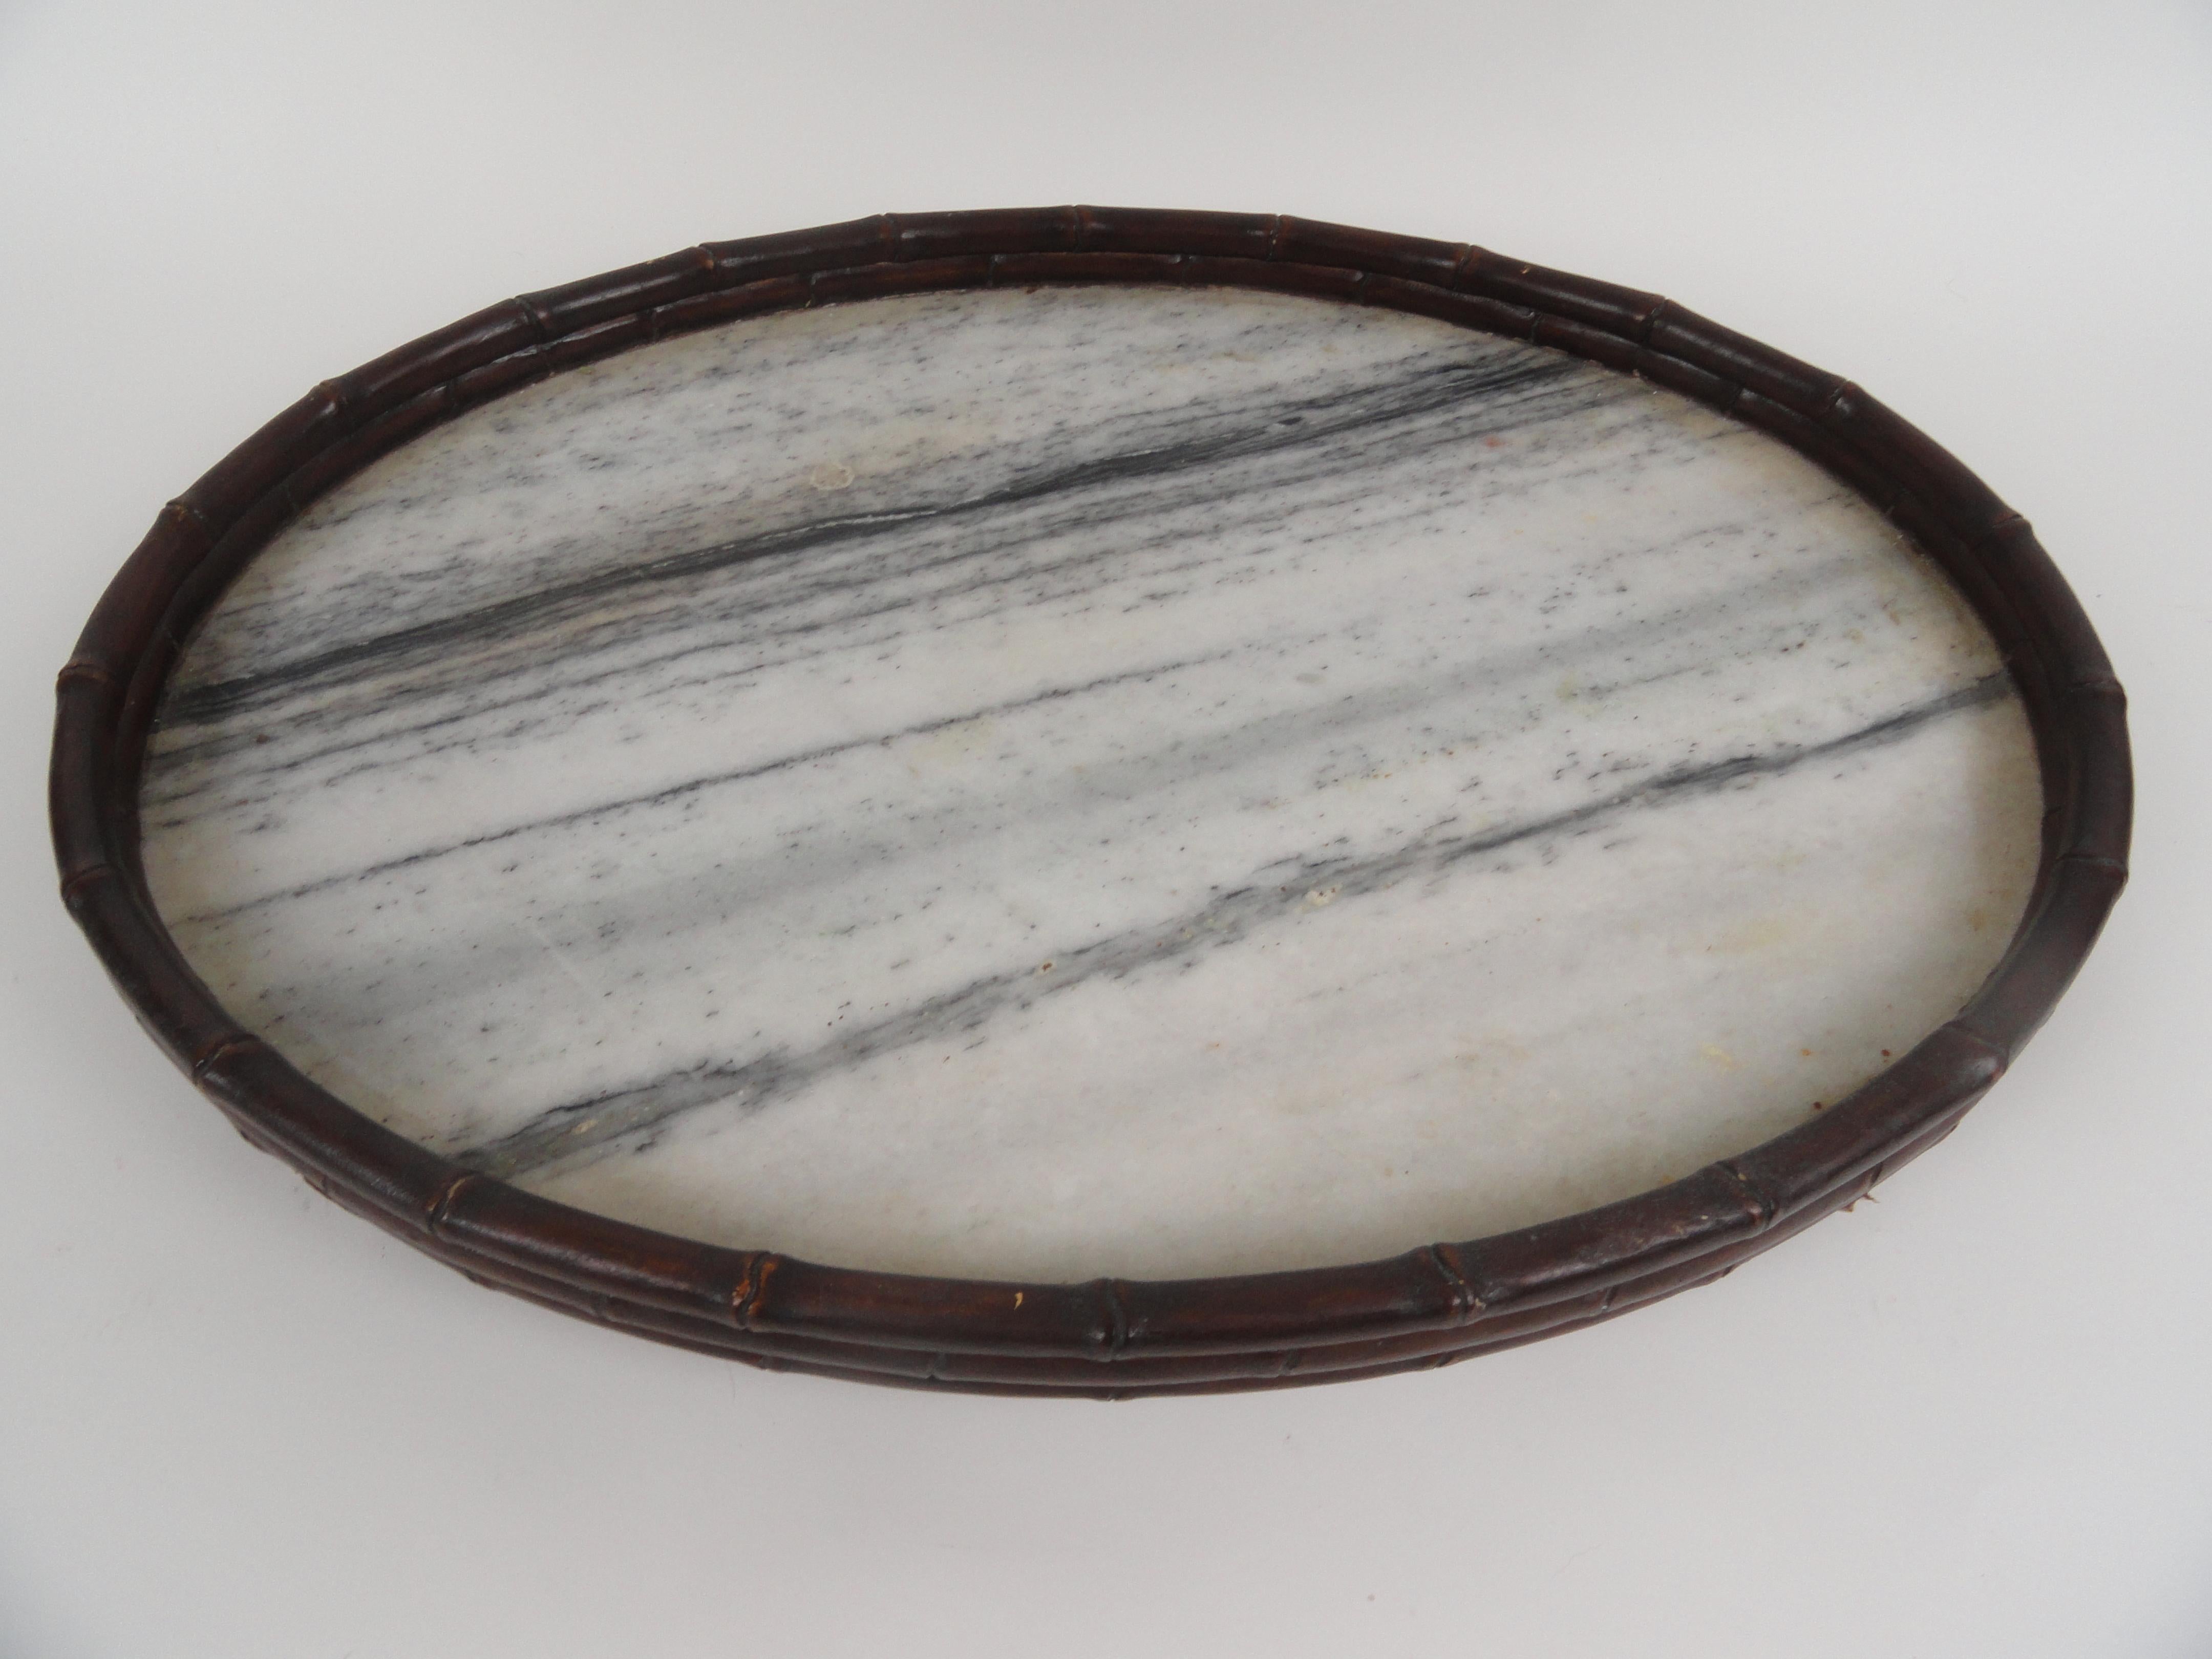 Chinese serving tray with a marble top and curved wood bamboo motif around the top and sitting four feet.